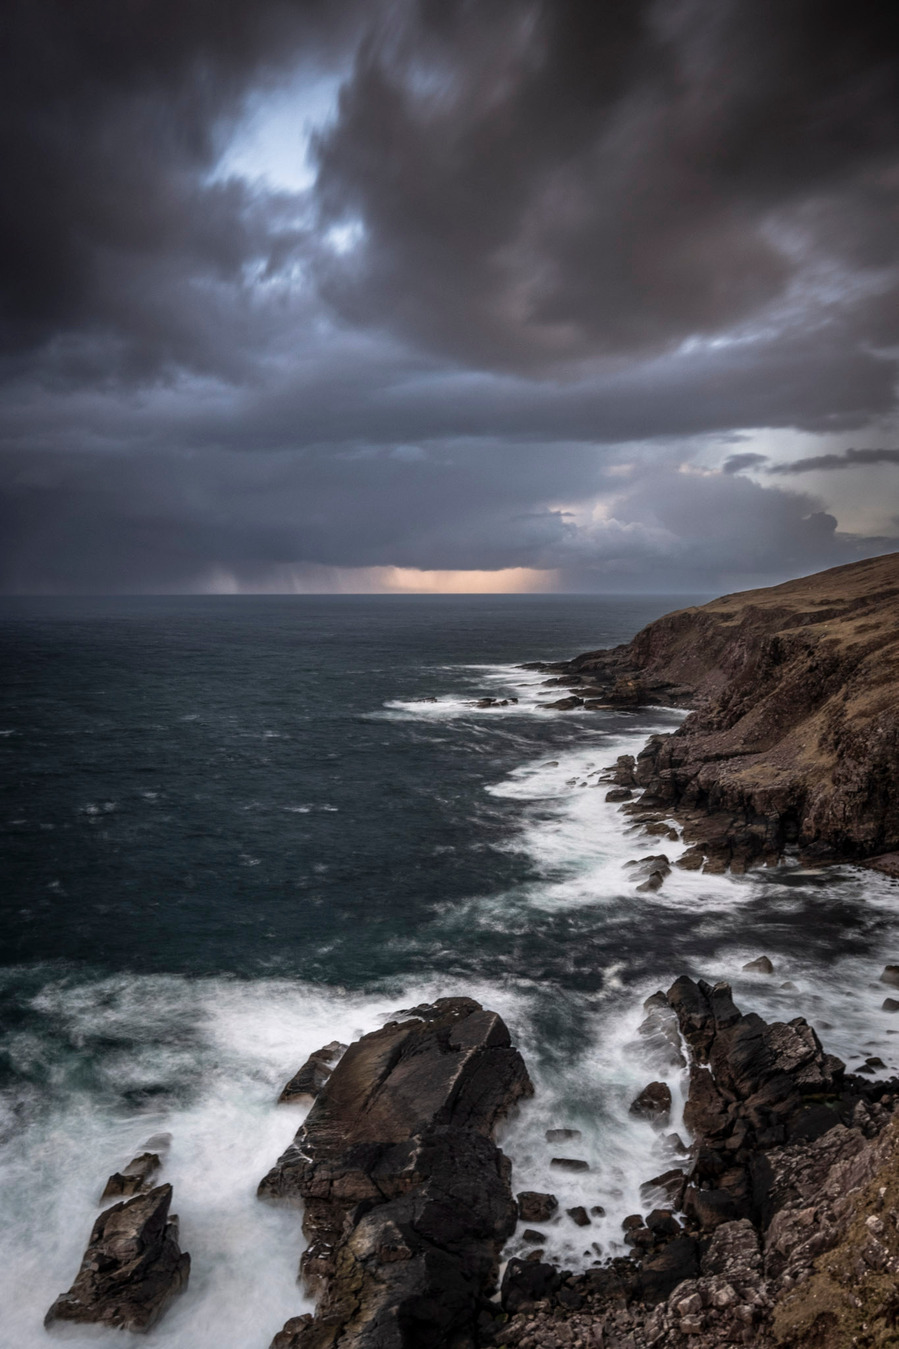 Scenic view of rugged rocks with crashing waves and a moody sky in North Scotland.